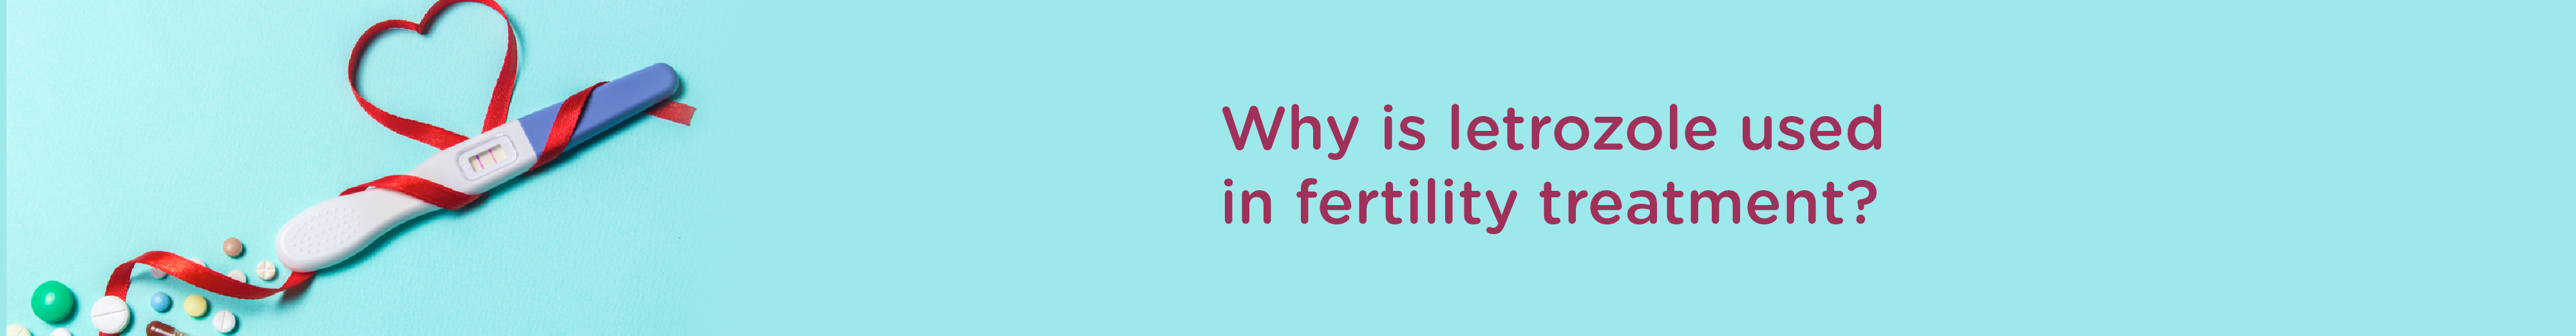 Why Is Letrozole Used in Fertility Treatment?